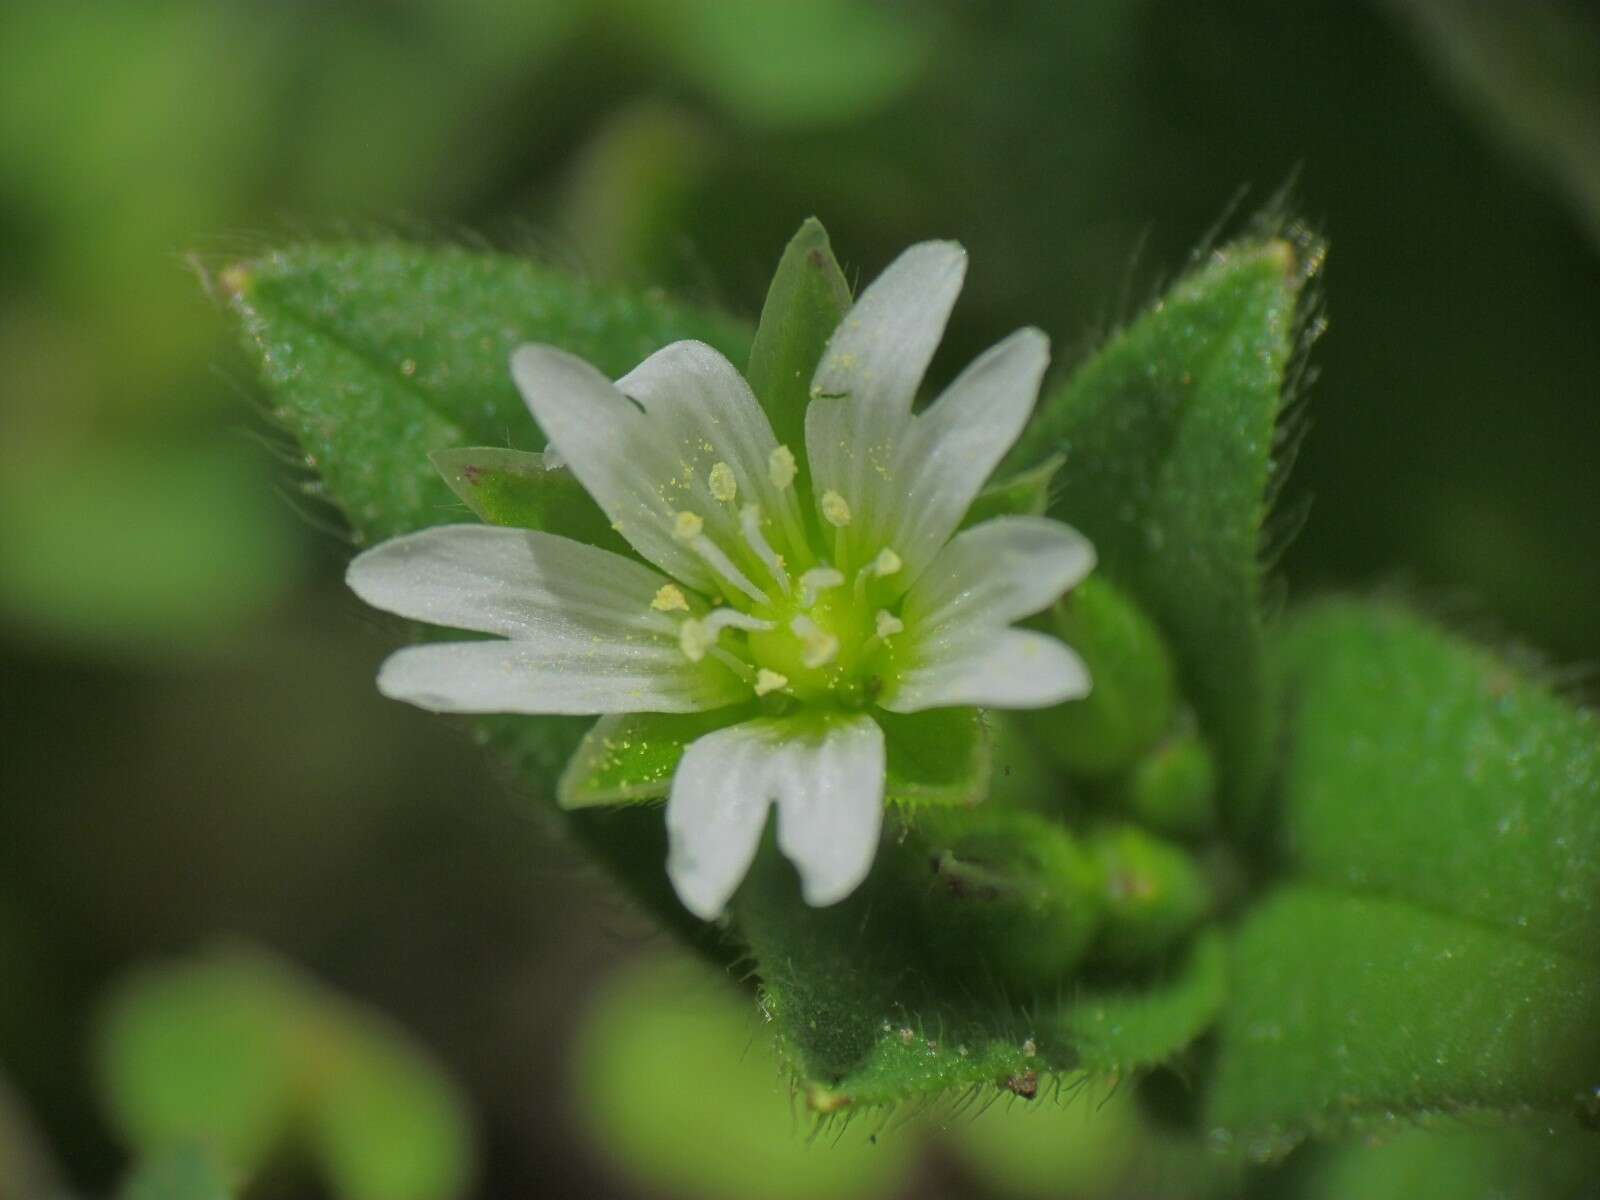 Image of common mouse-ear chickweed